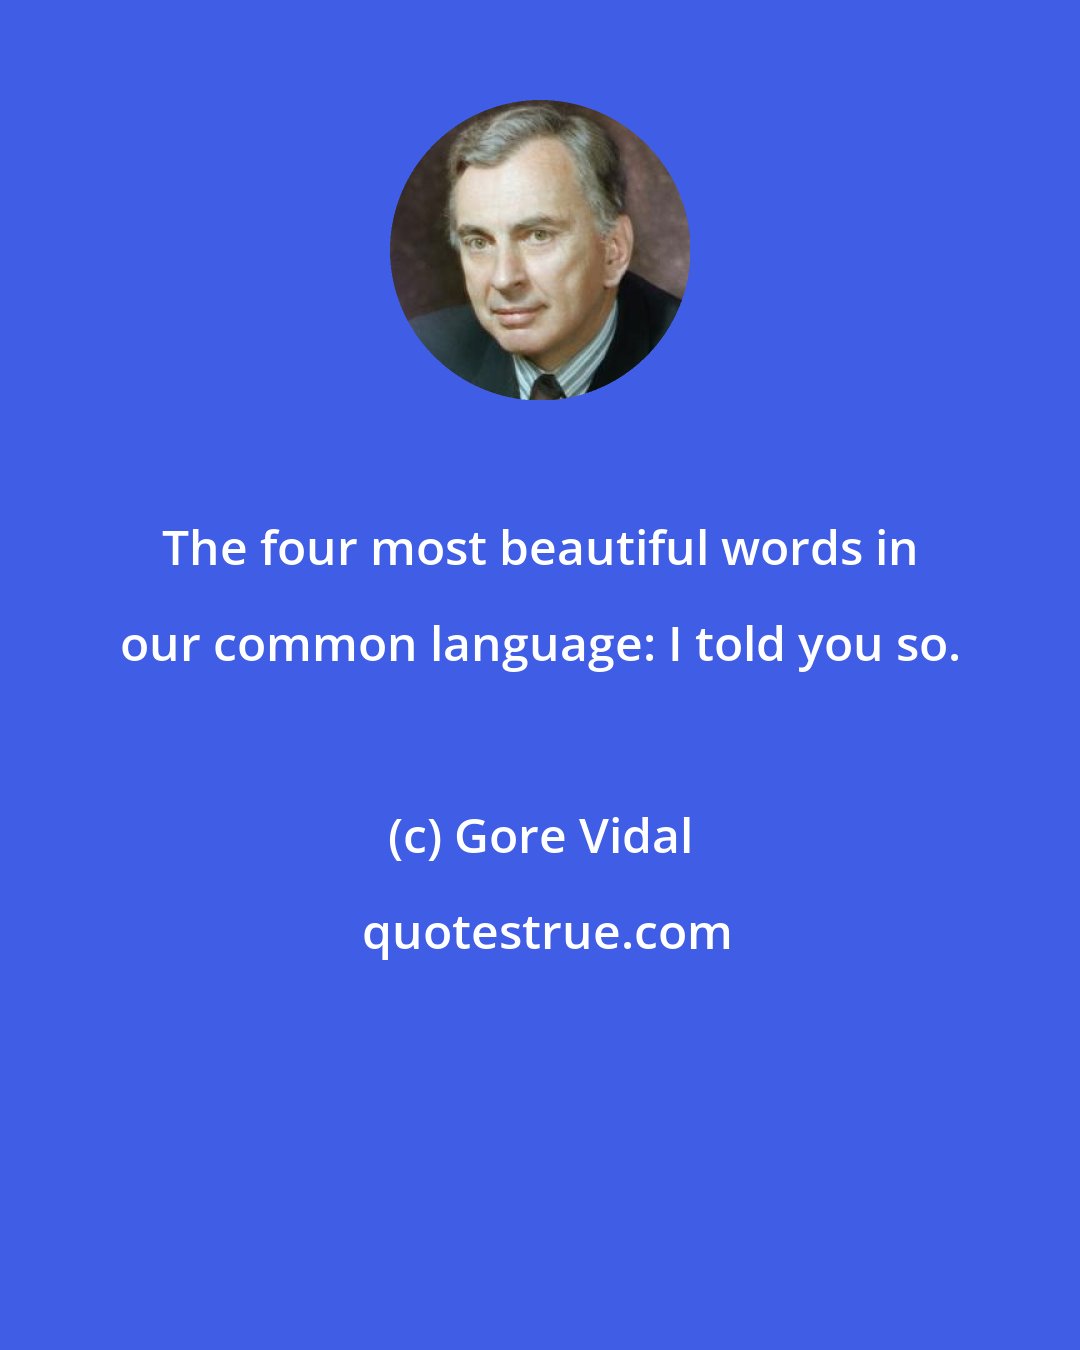 Gore Vidal: The four most beautiful words in our common language: I told you so.